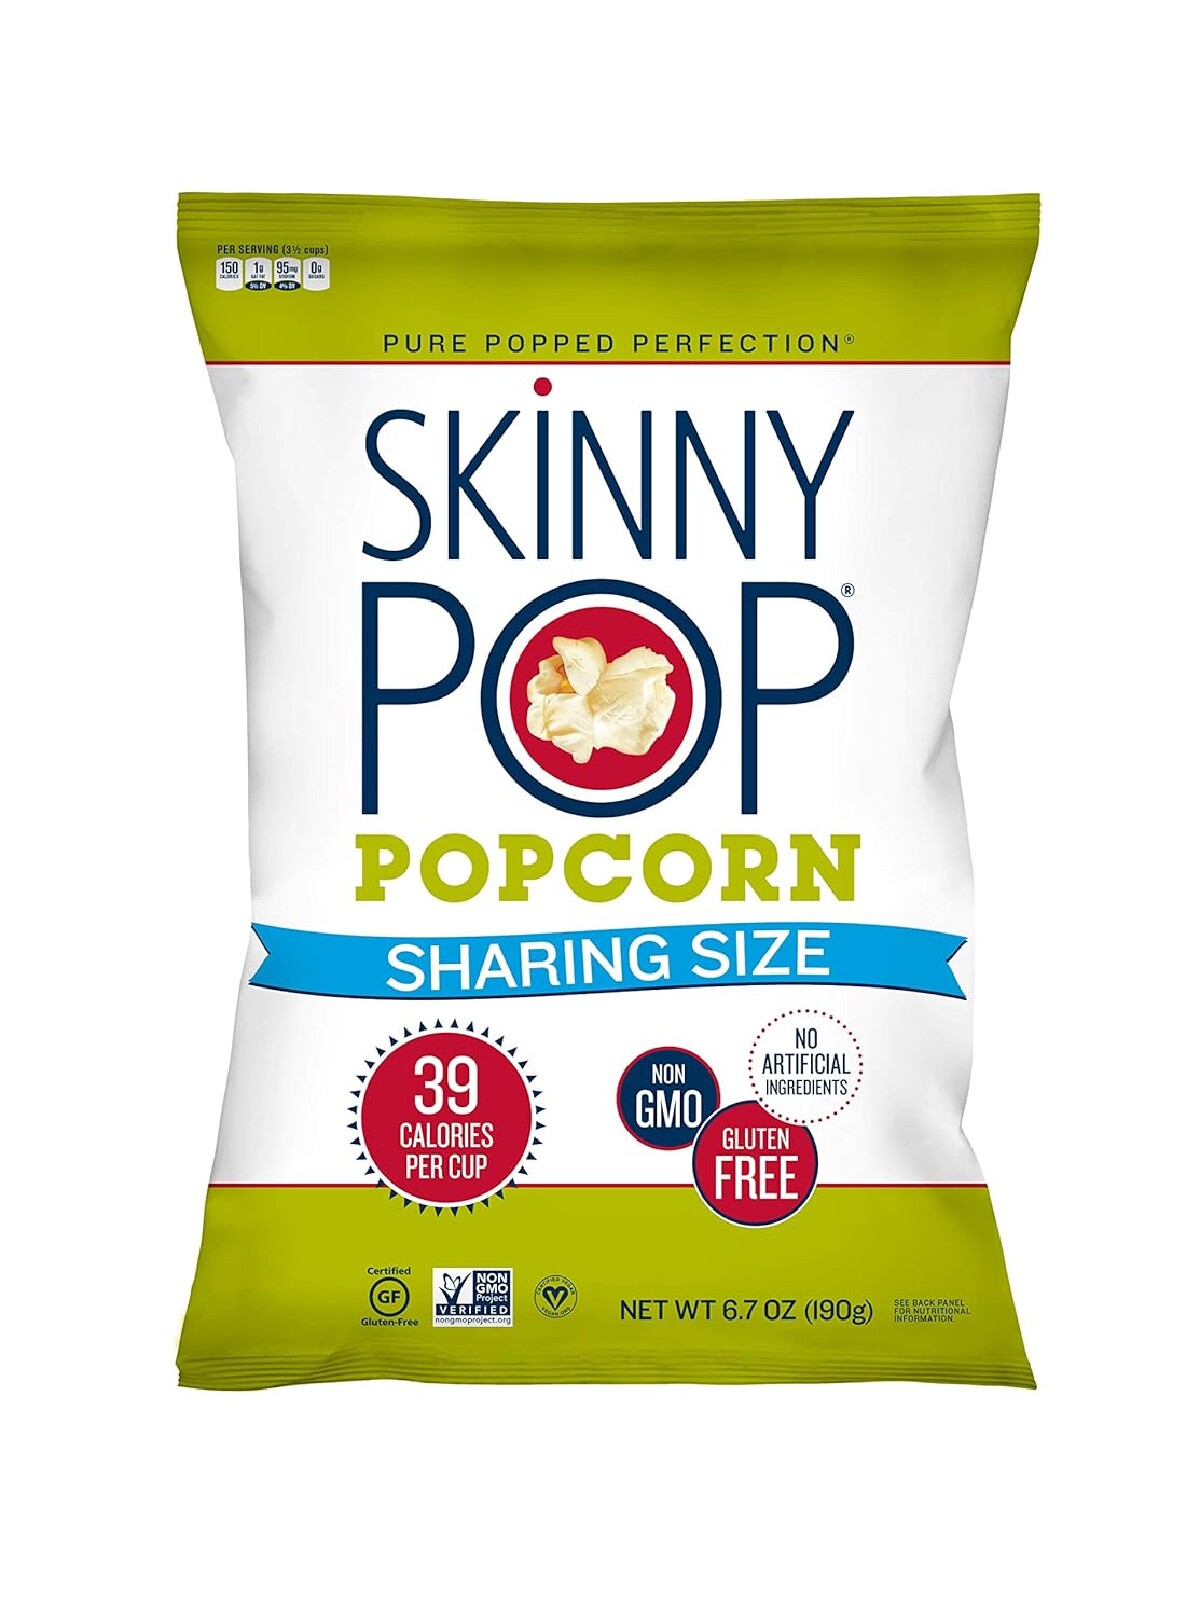 A green, white and red bag of Skinny Pop popcorn against a white background. 